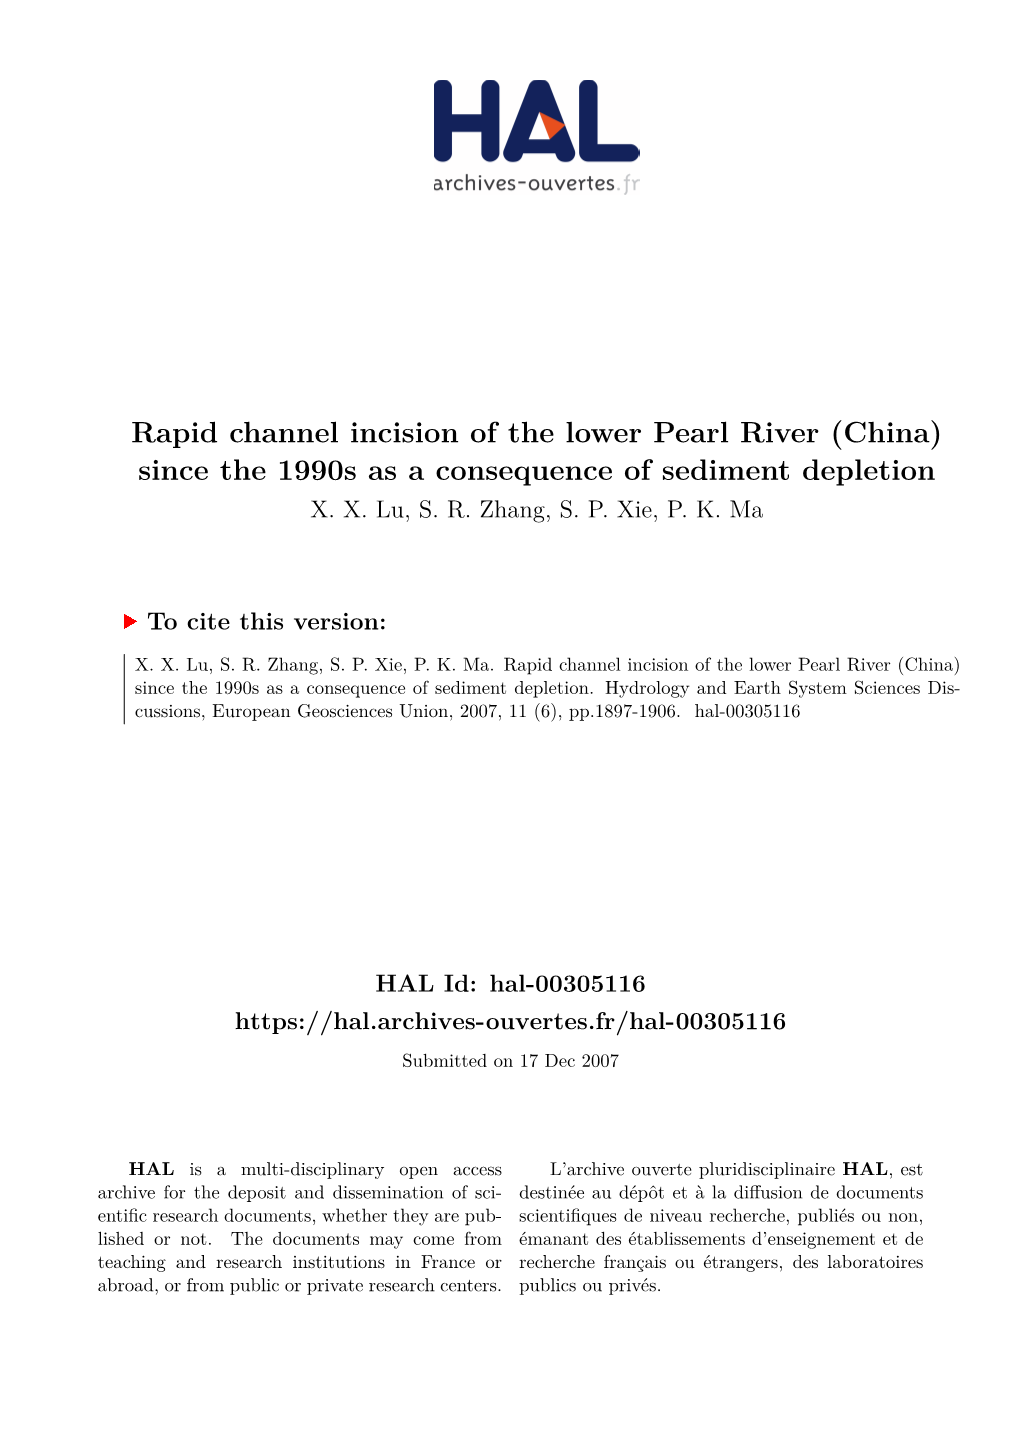 Rapid Channel Incision of the Lower Pearl River (China) Since the 1990S As a Consequence of Sediment Depletion X